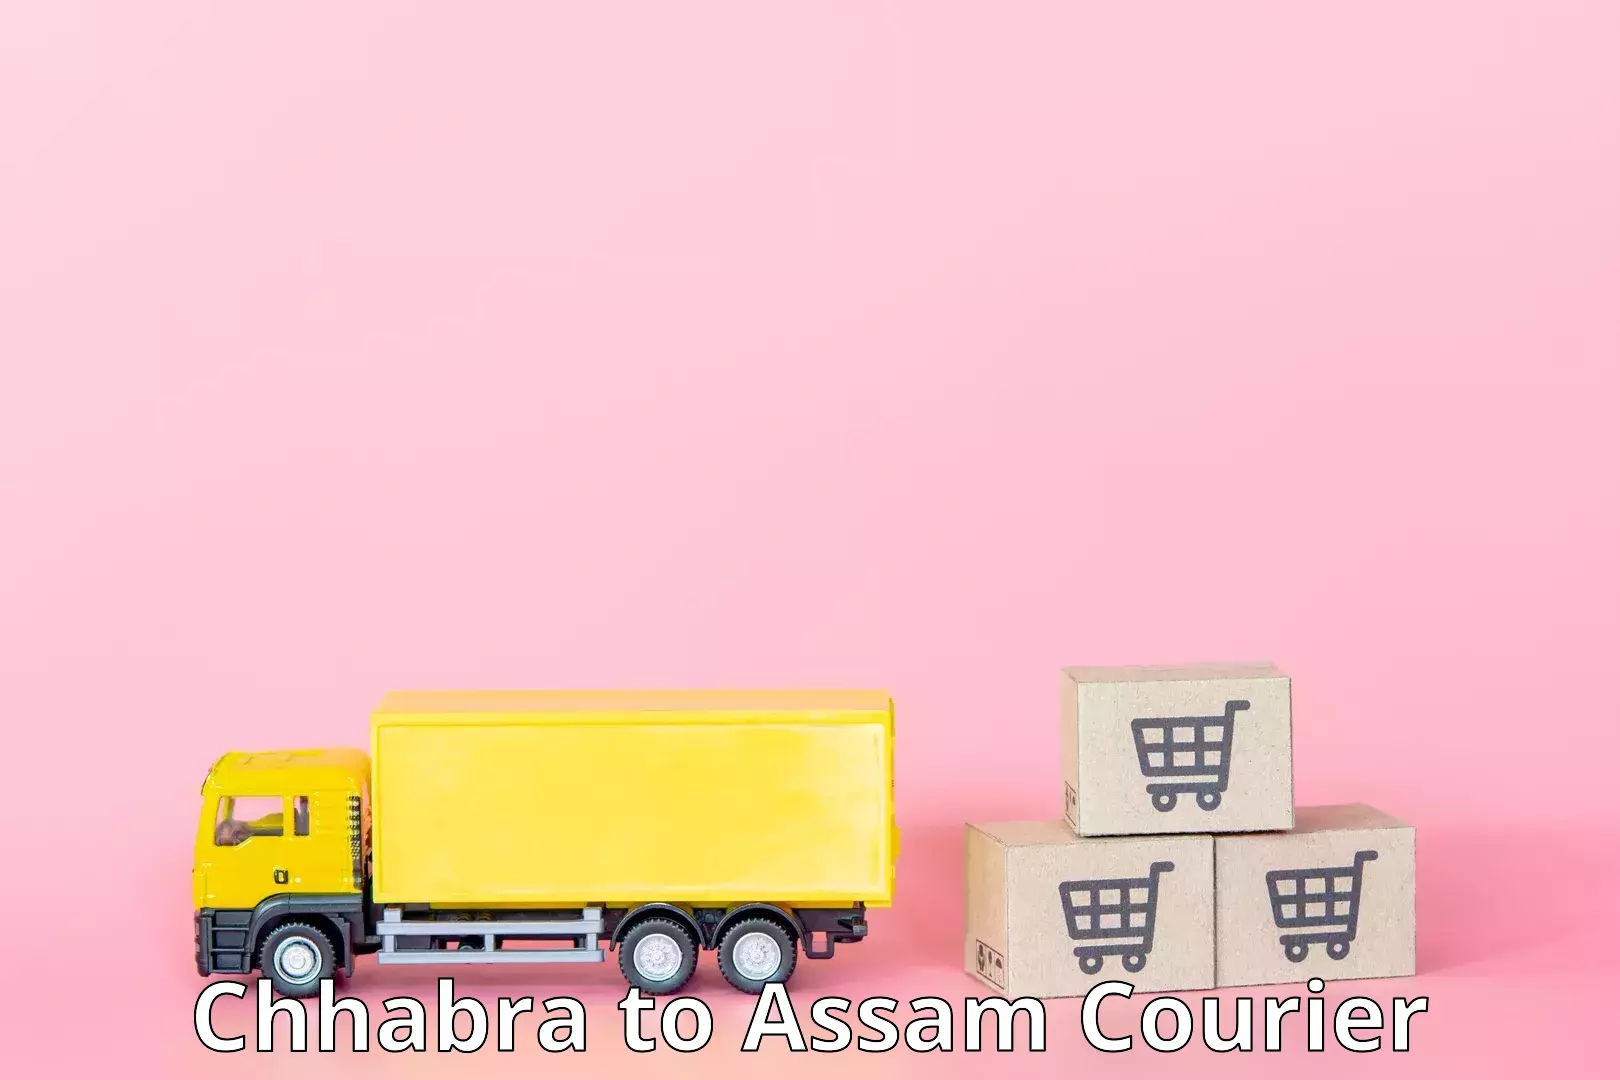 On-demand delivery Chhabra to Dhubri